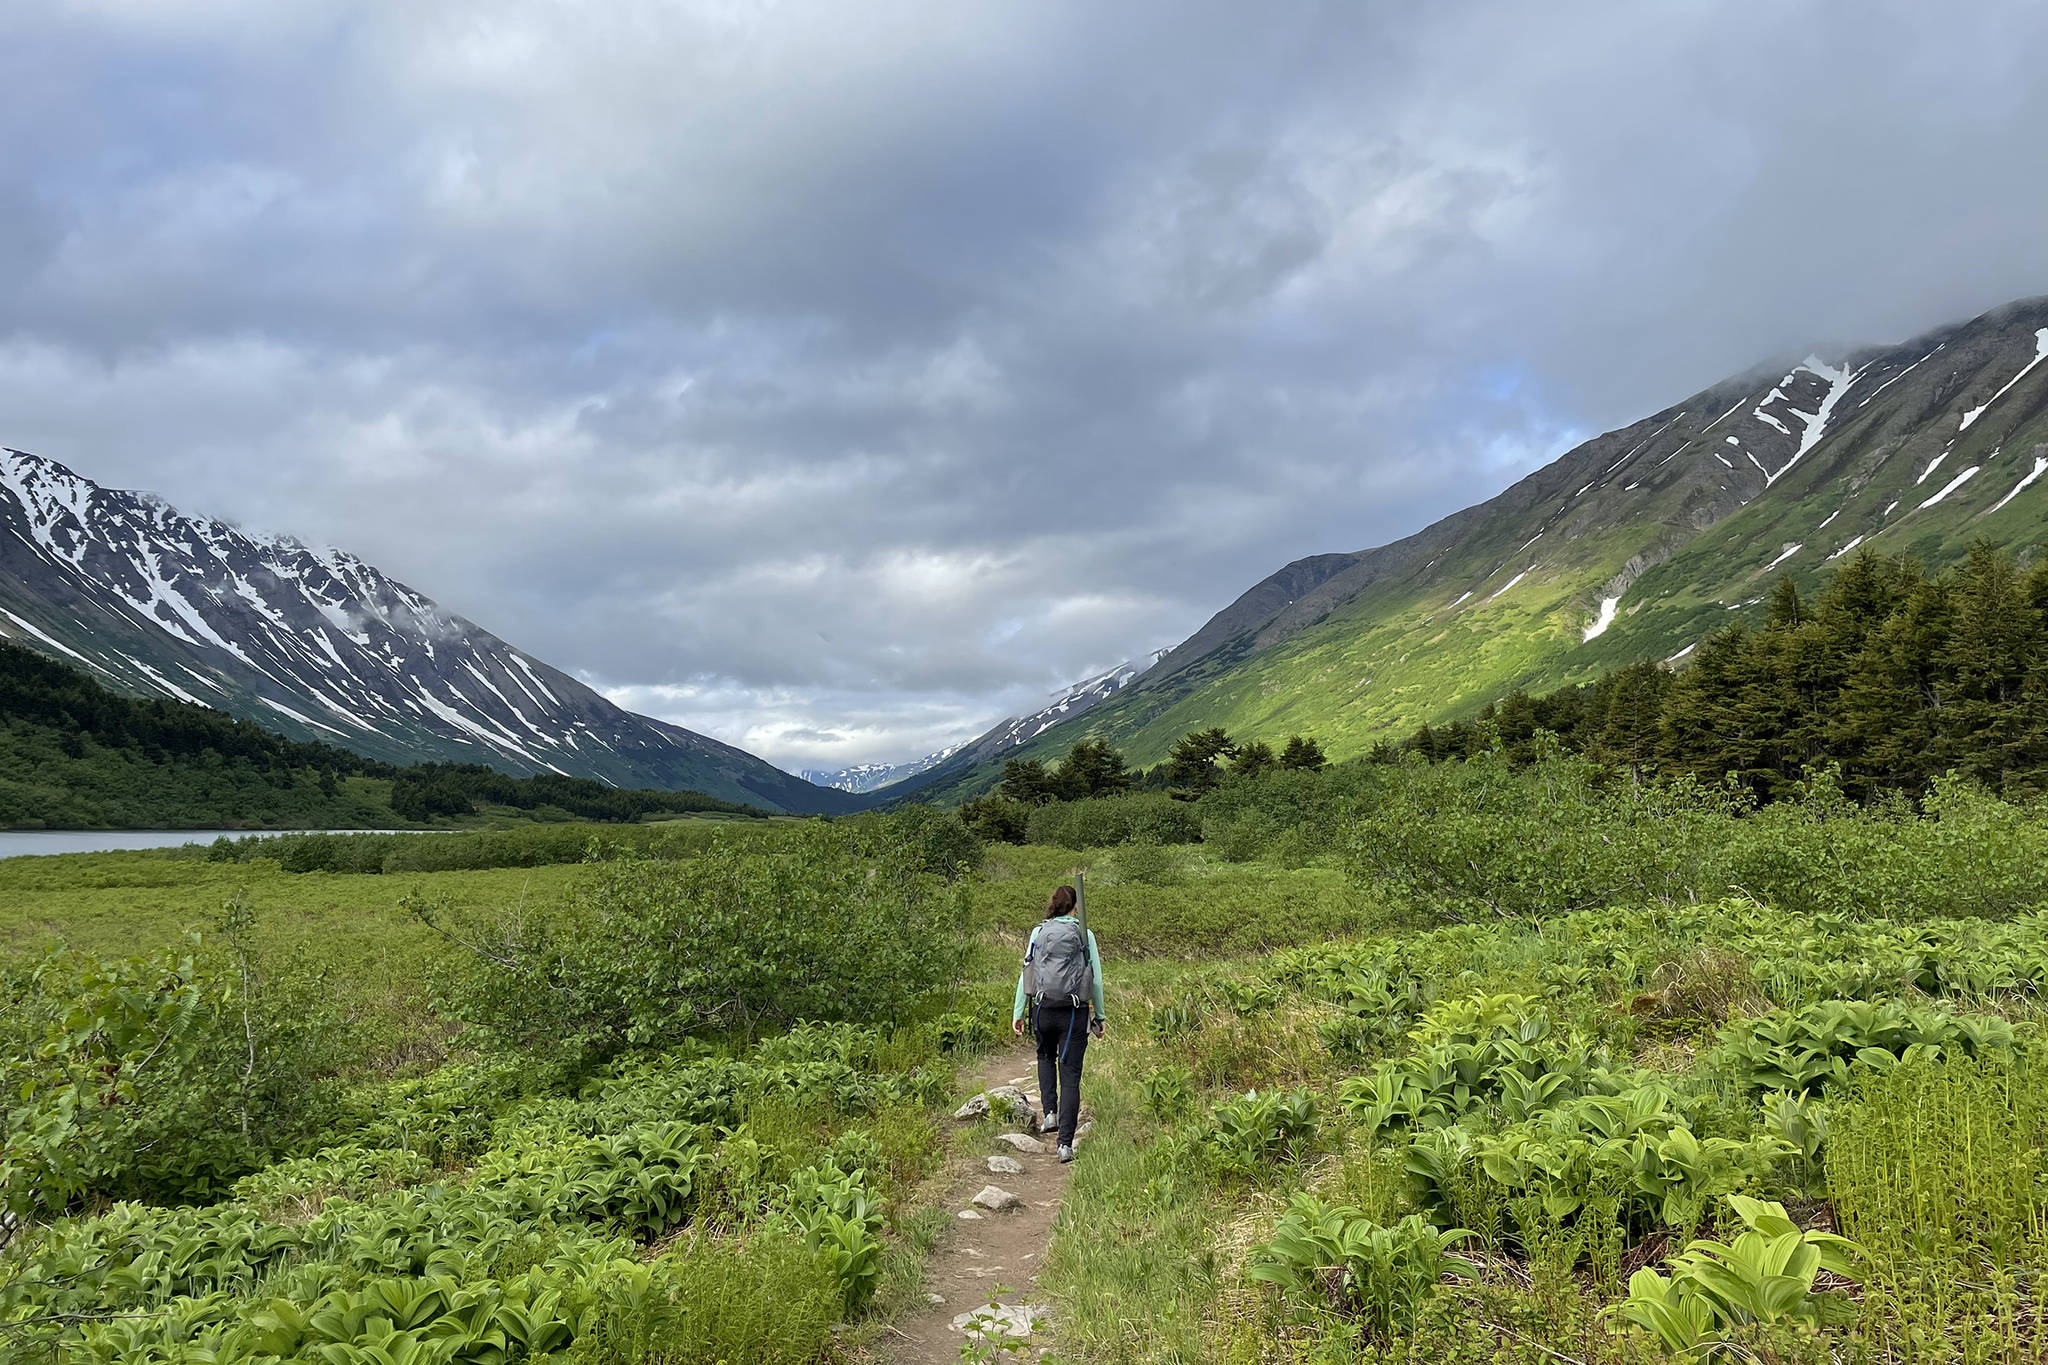 Backpackers often want seclusion and peace, but with a trail comes company and the perception of too many people. 
(Jeff Lund / For the Juneau Empire)